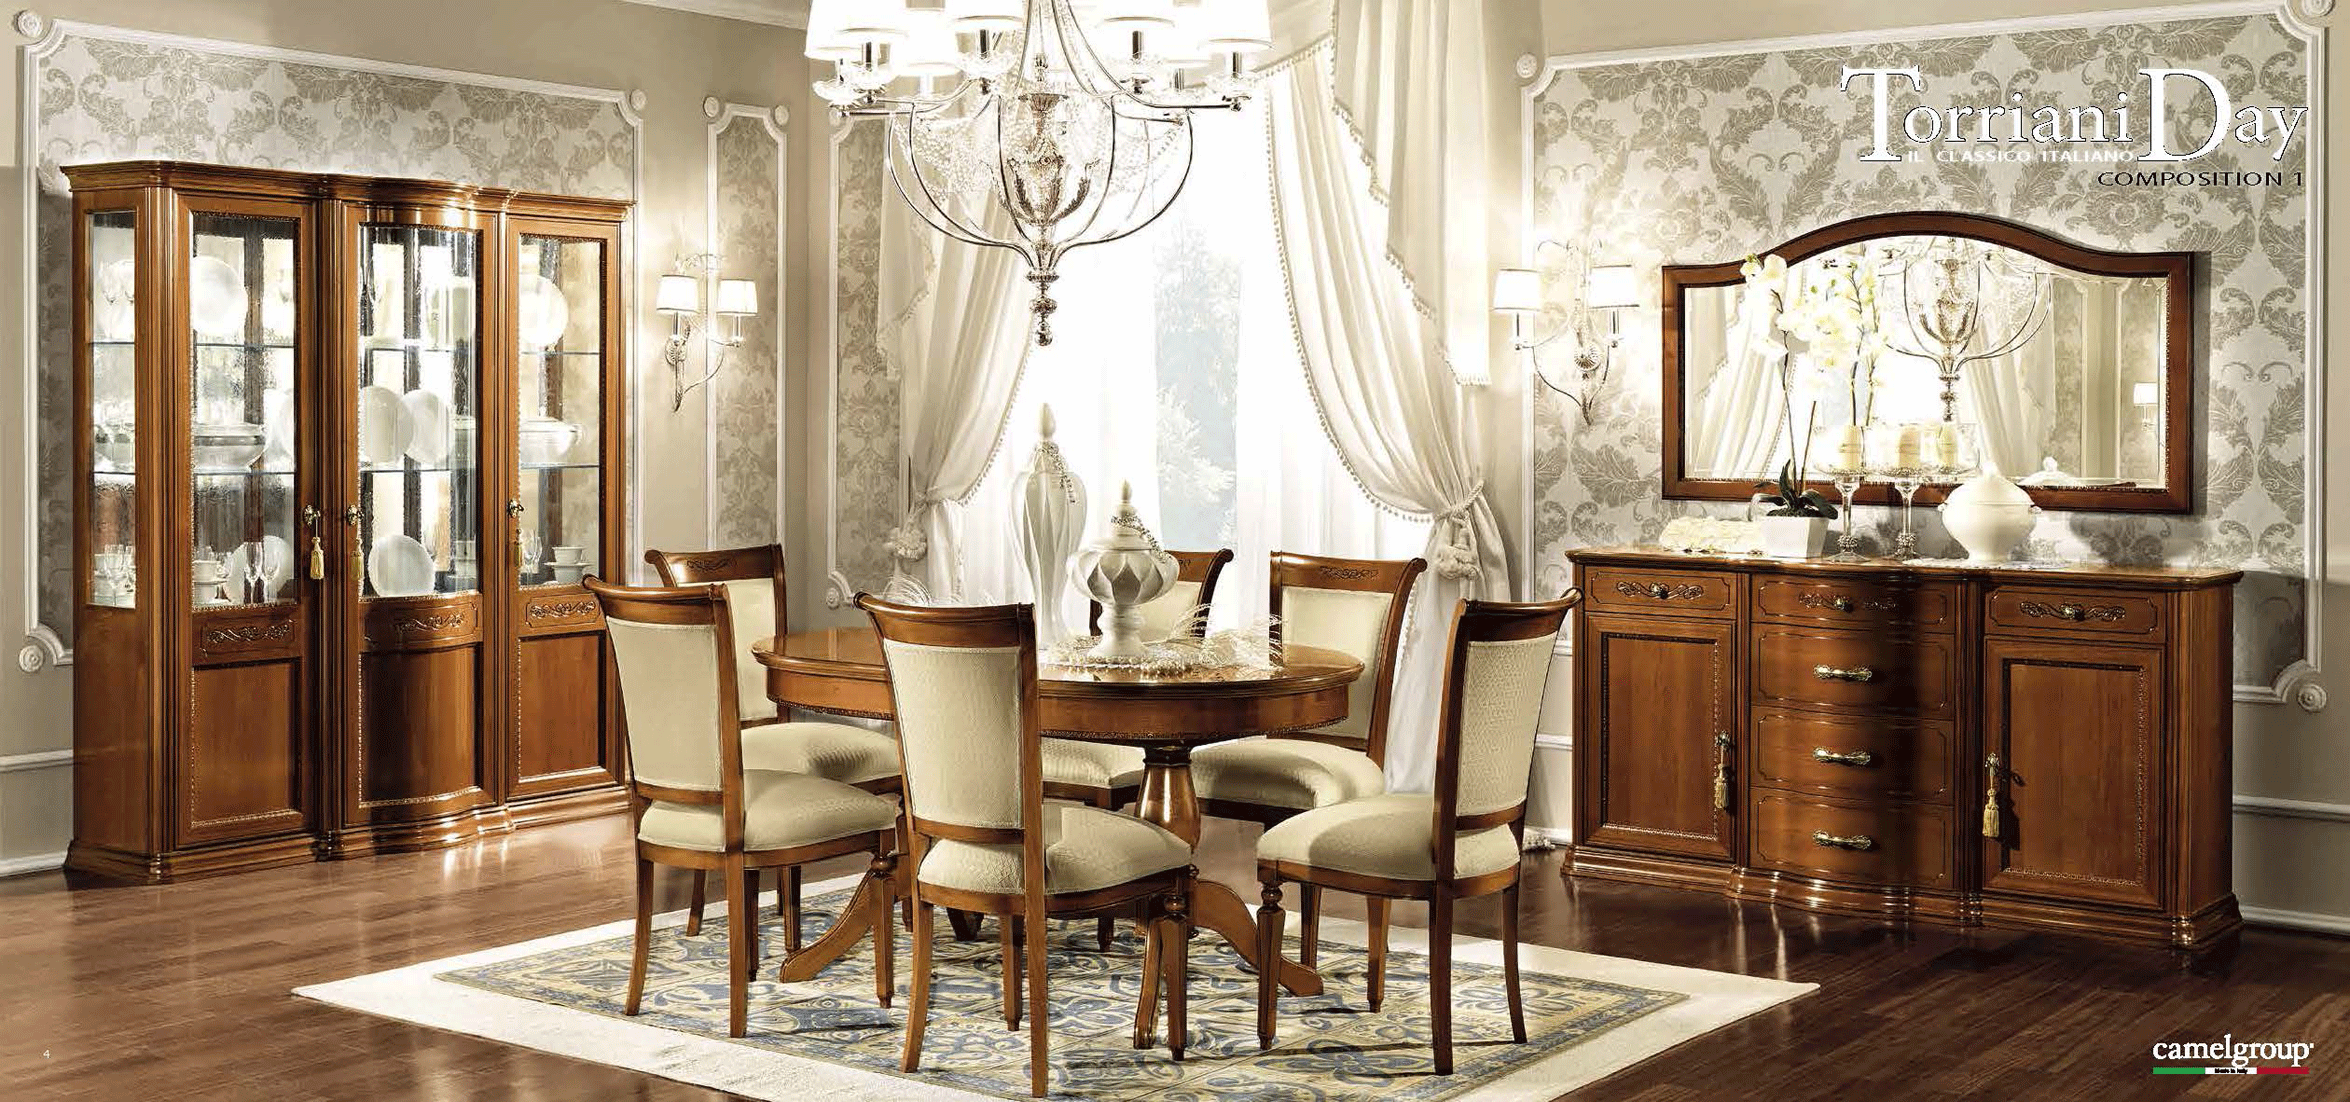 Dining Room Furniture China Cabinets and Buffets Torriani Day